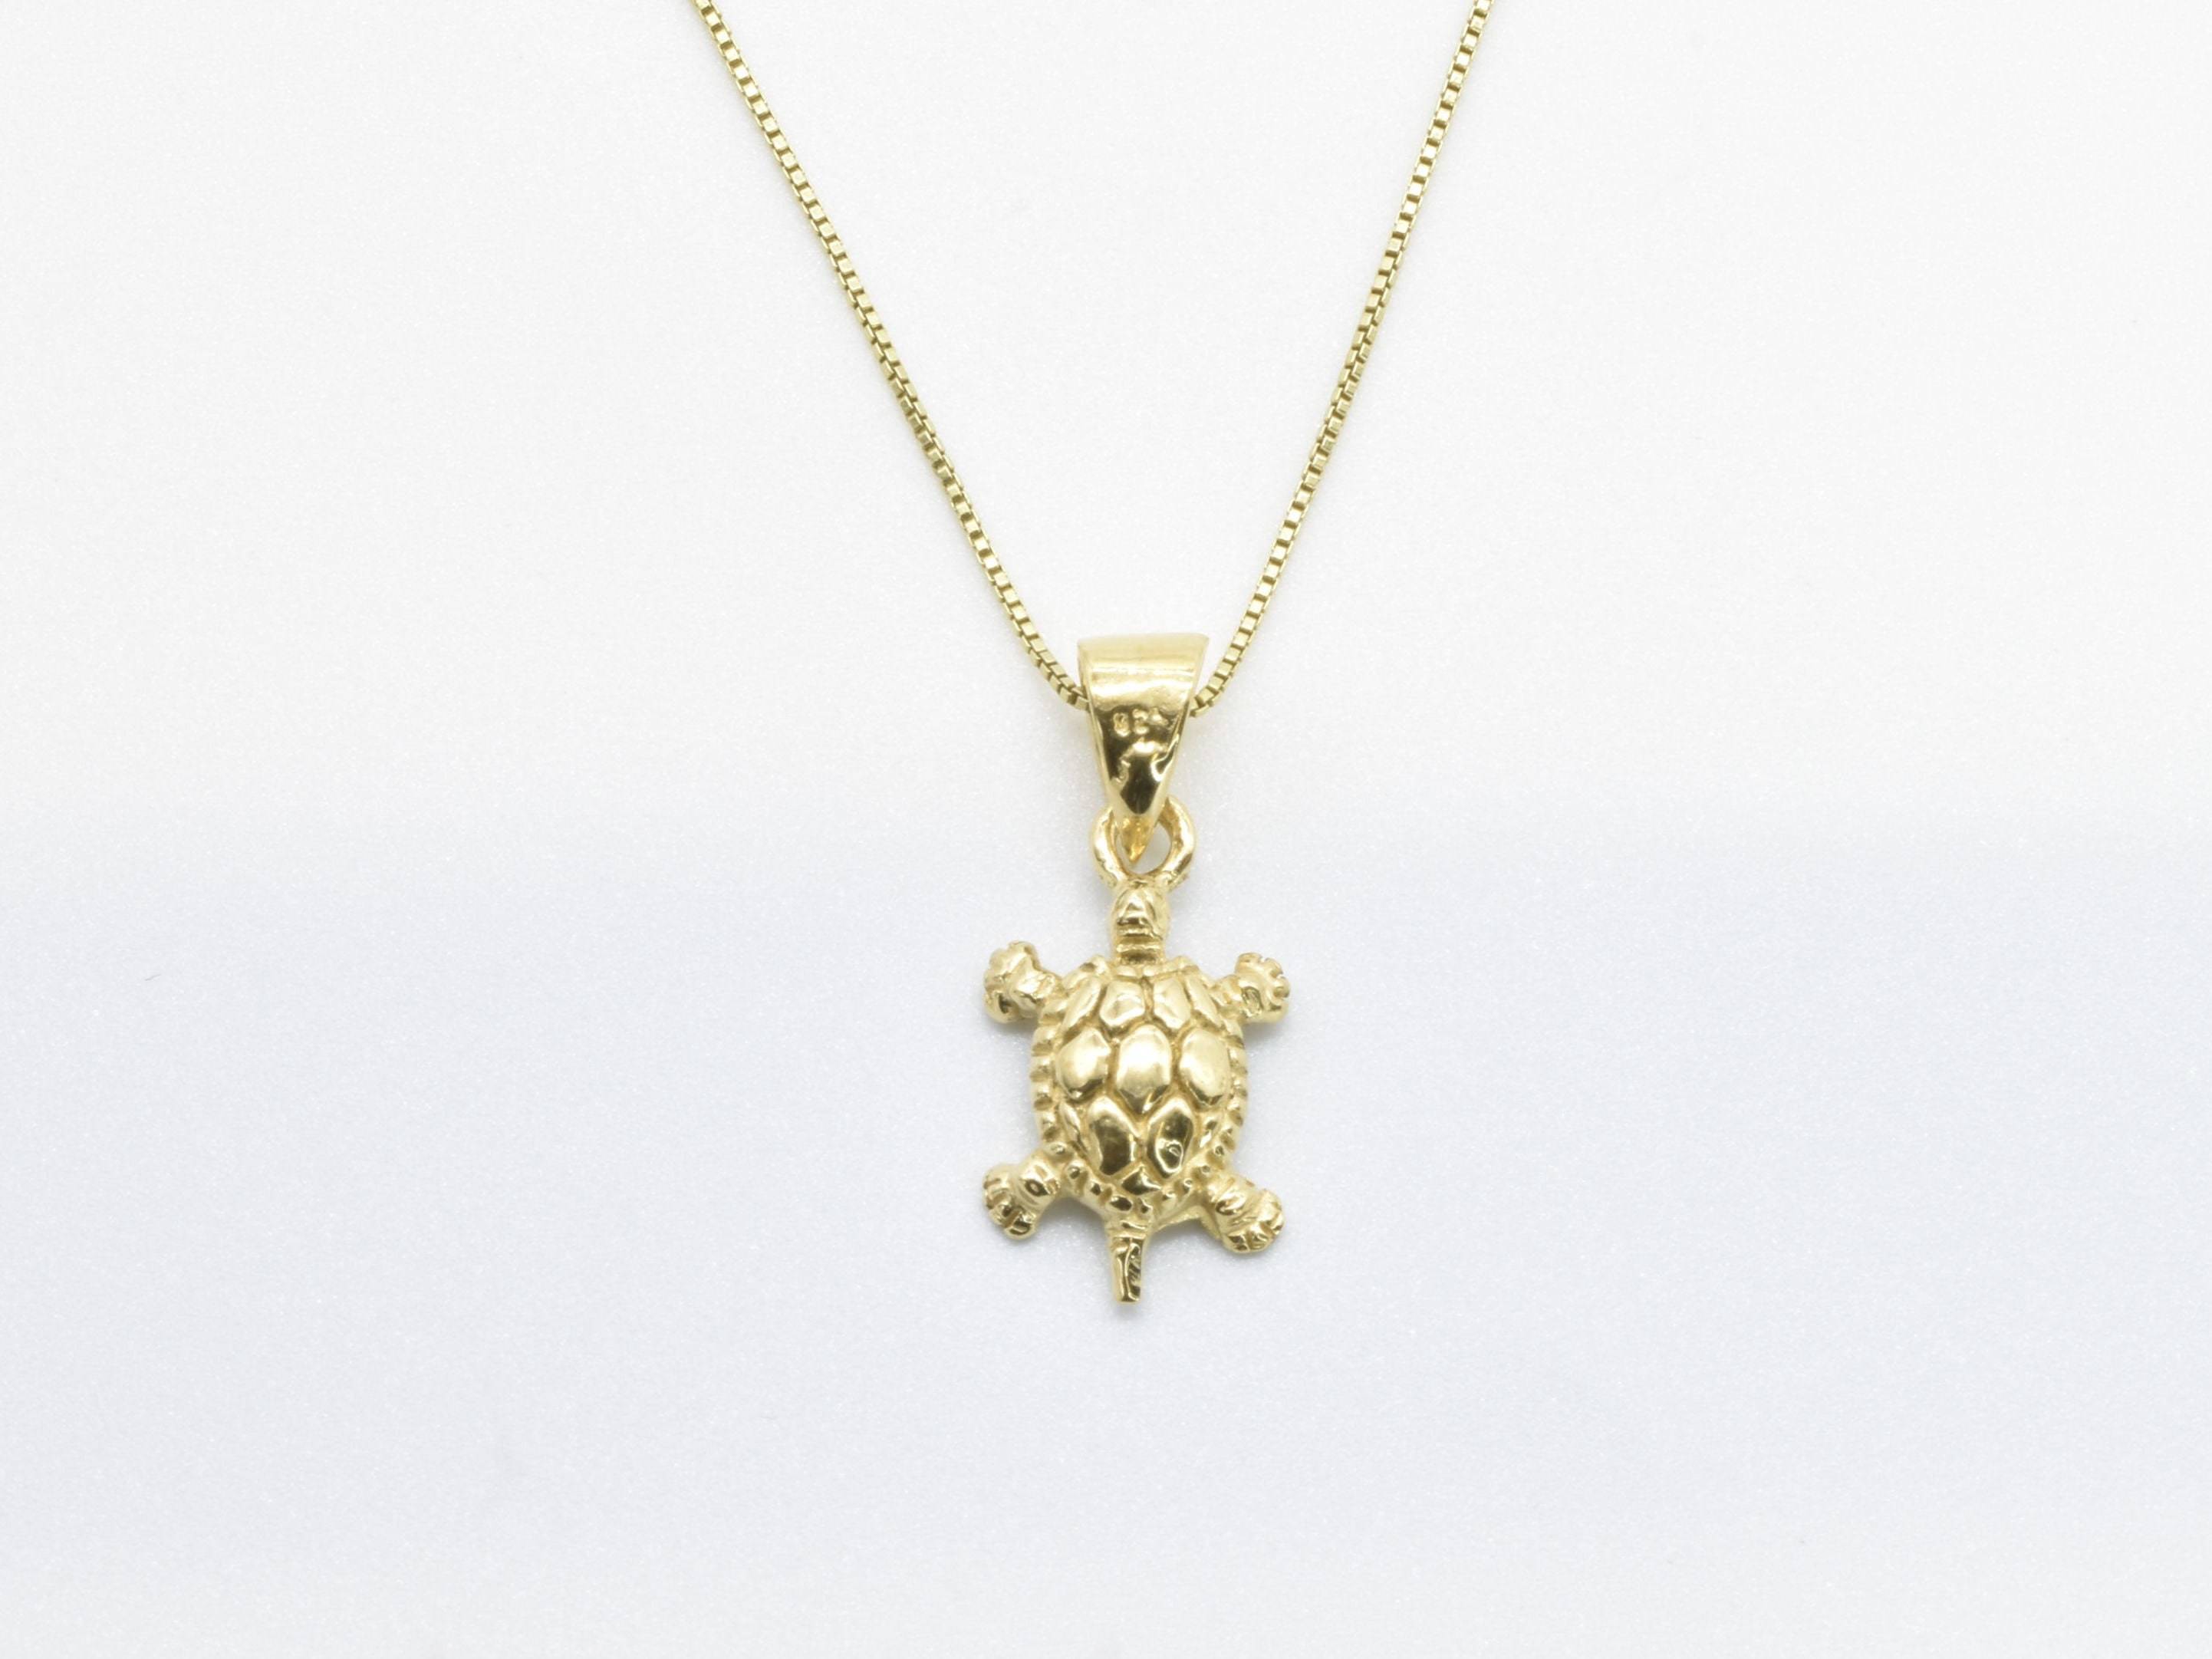 Gold Turtle Necklace- Animal Lover Gold Necklace, Small Turtle Necklace